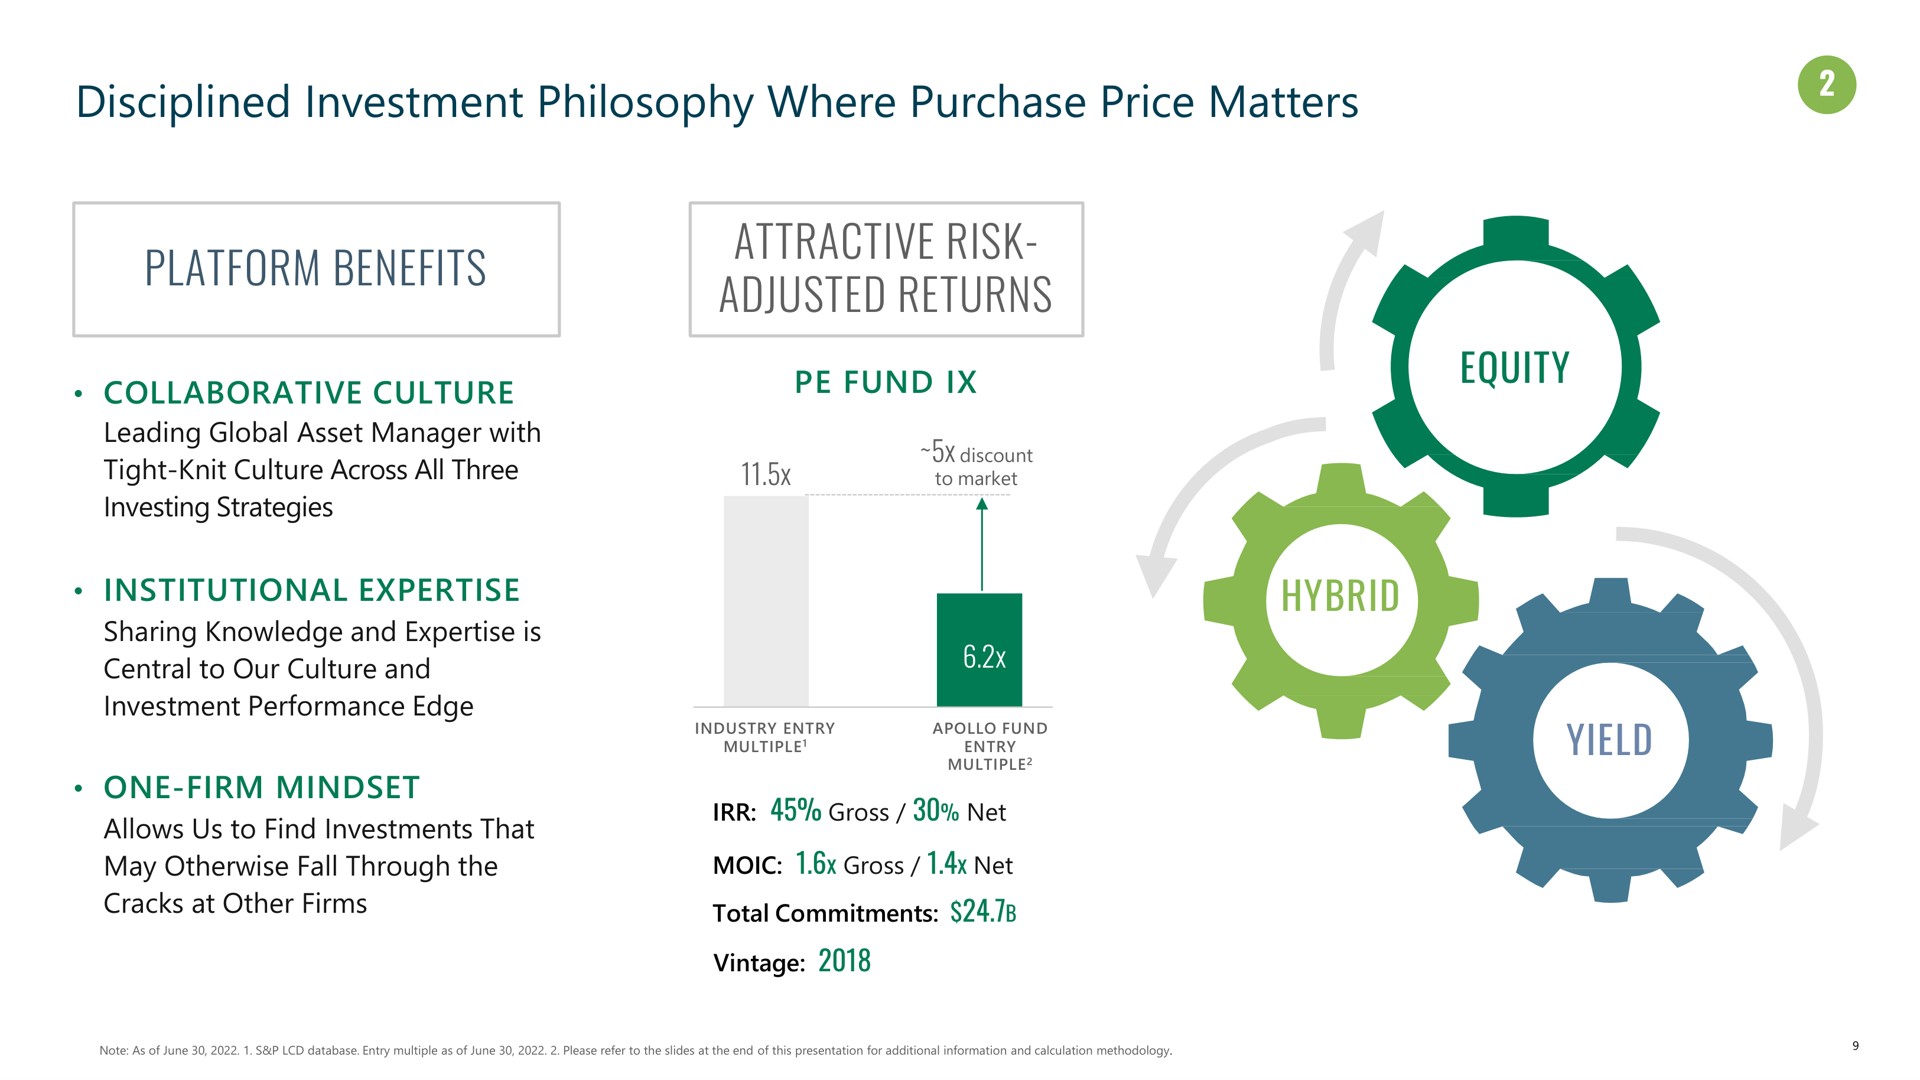 disciplined investment philosophy where purchase price matters platform benefits attractive risk adjusted returns equity hybrid yield collaborative culture | Apollo Global Management